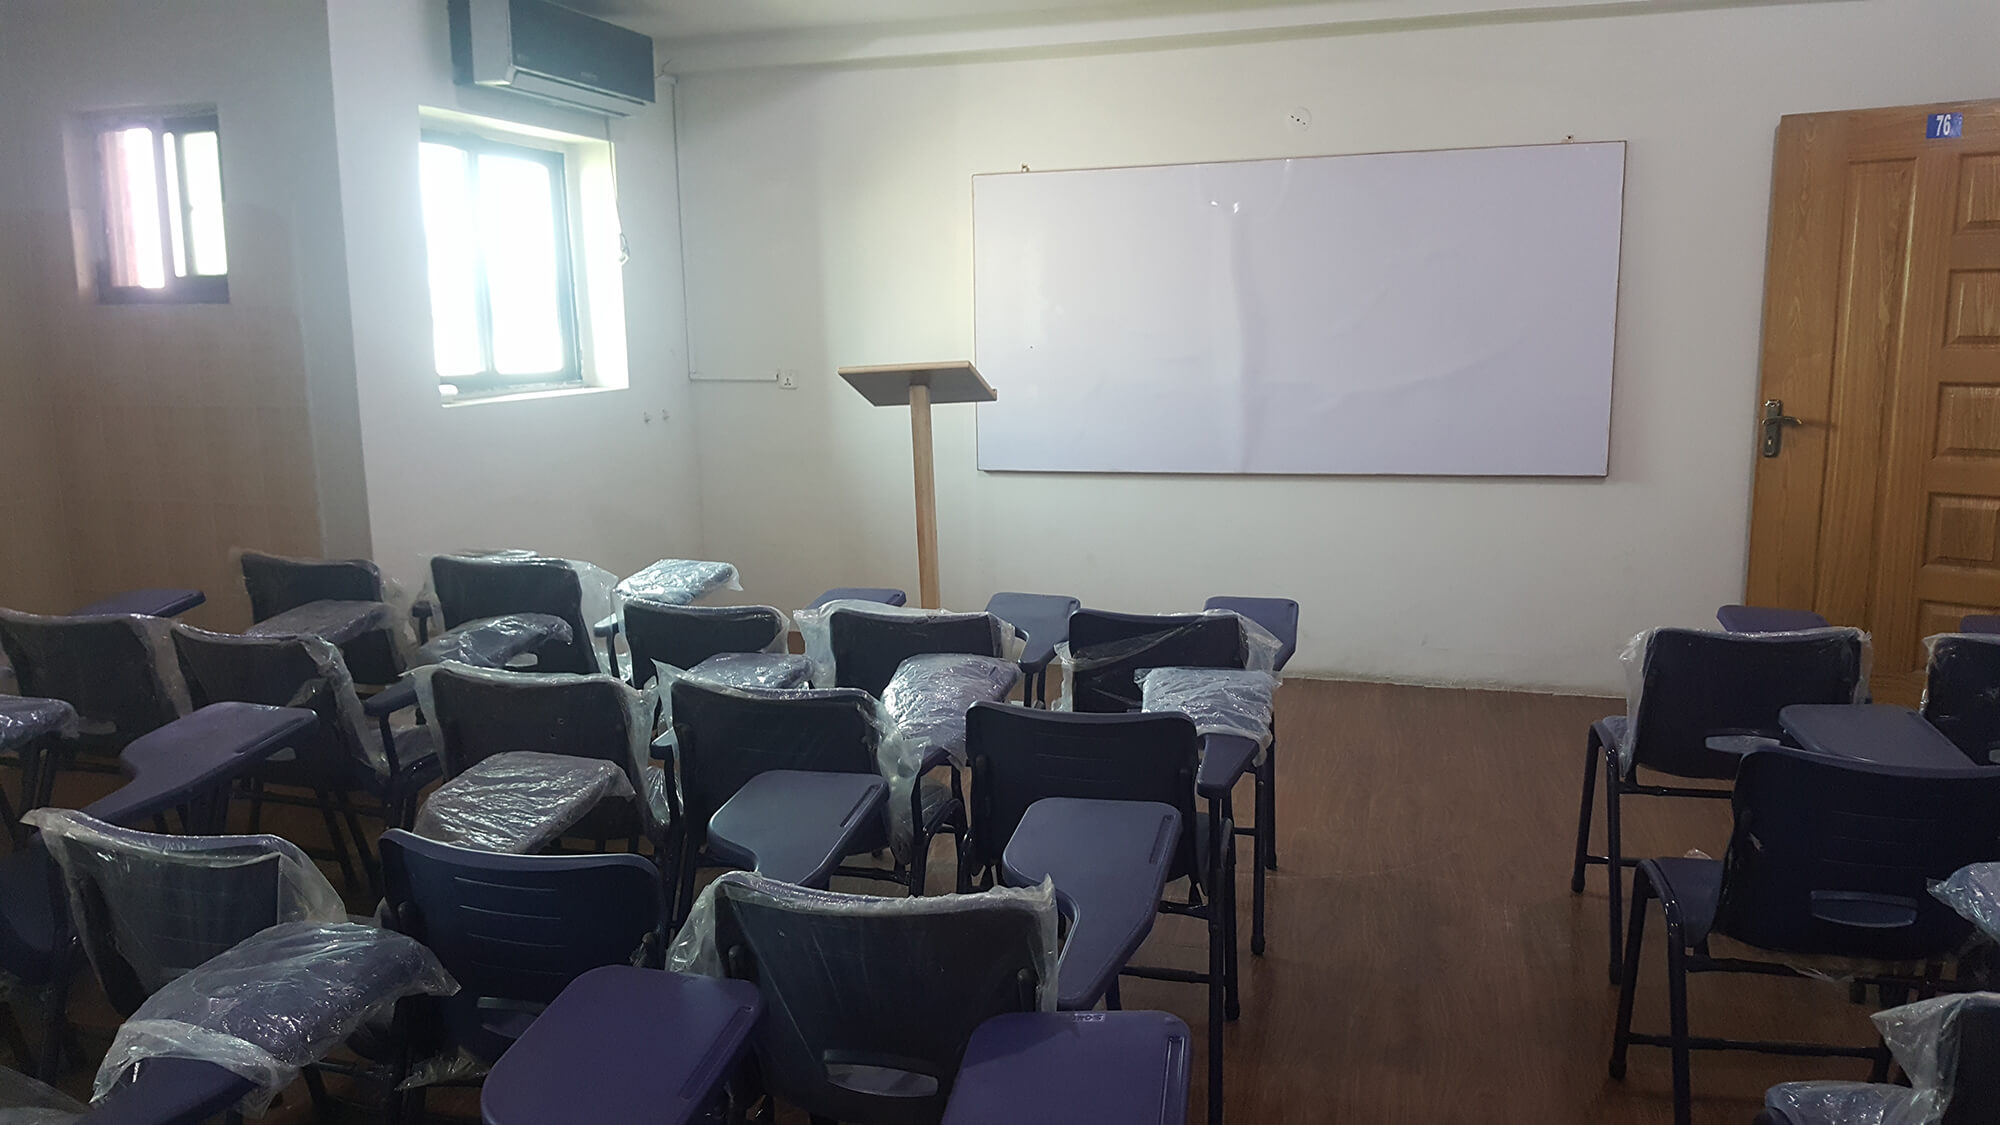 Lecture Halls 17